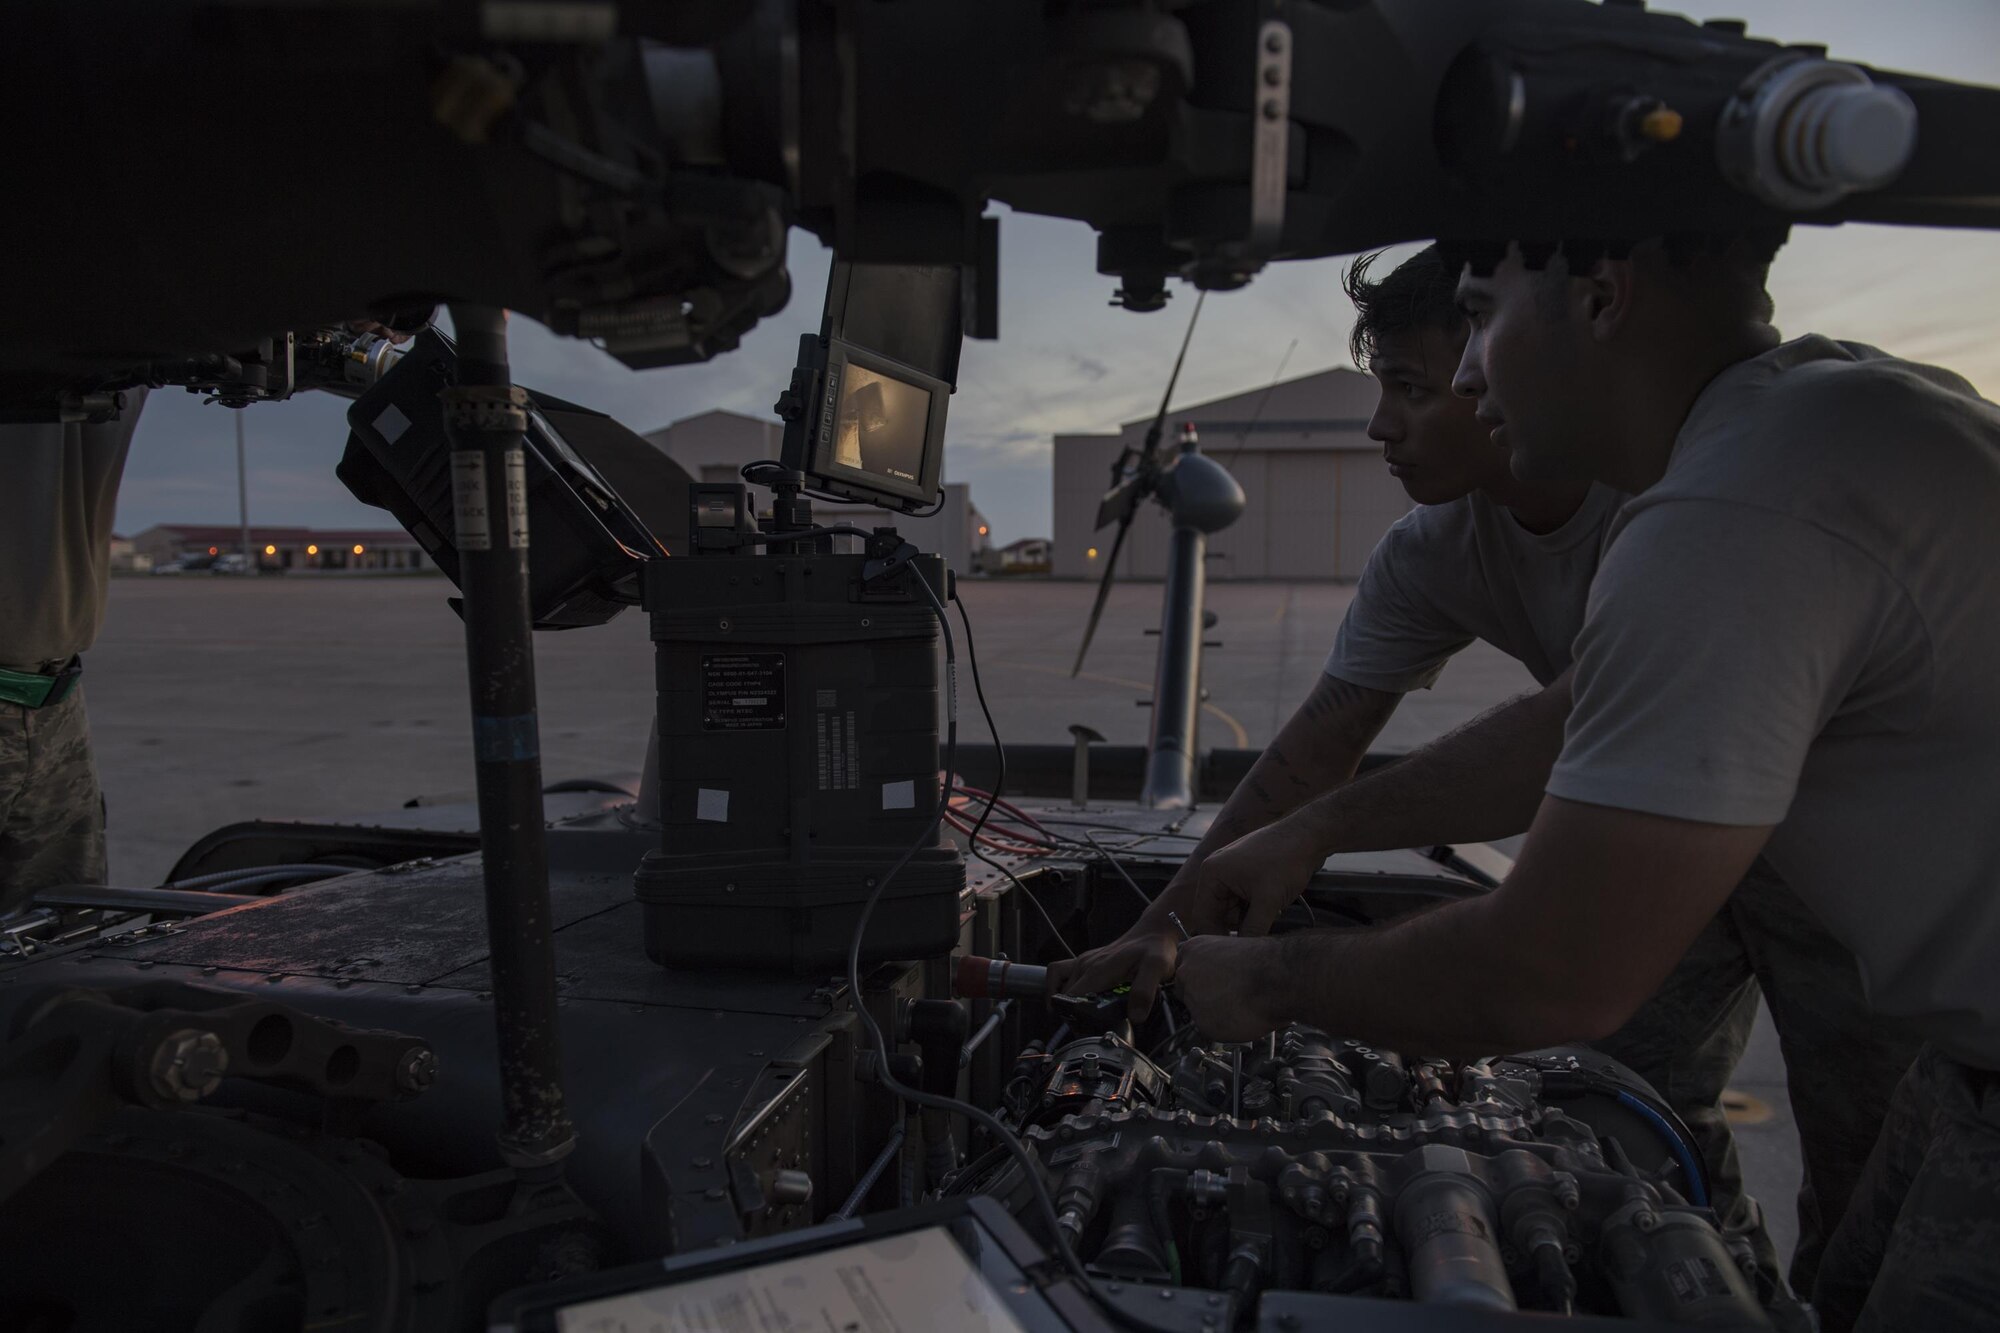 Senior Airmen Matthew Steward, left, 41st Helicopter Maintenance Unit crew chief, and Vivek Lebouef, 41st HMU aerospace propulsion technician, guide a small camera through the intake of an HH-60G Pave Hawk engine, Dec. 12, 2016, at Patrick Air Force Base, Fla. After the helicopter struck a bird, Airmen conducted detailed inspections before flying again. (U.S. Air Force photo by Airman 1st Class Daniel Snider)